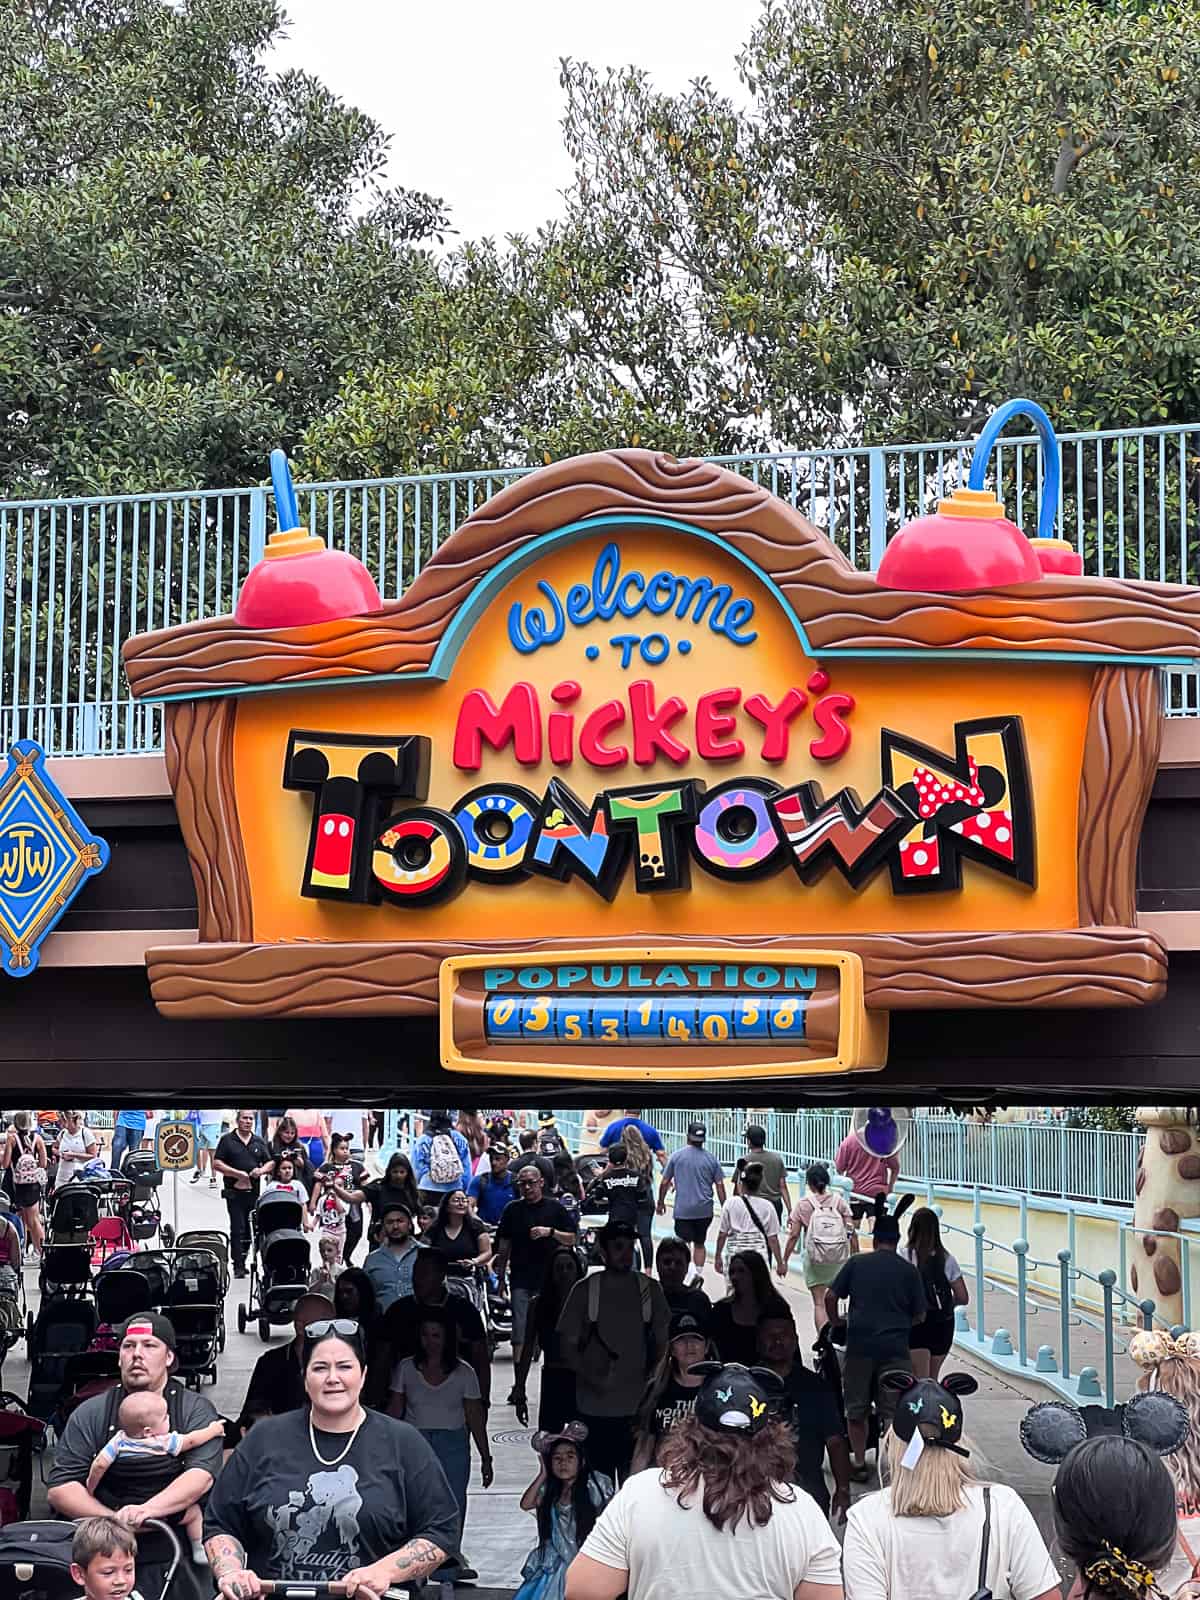 Entrance to Mickey’s Toontown in Disneyland